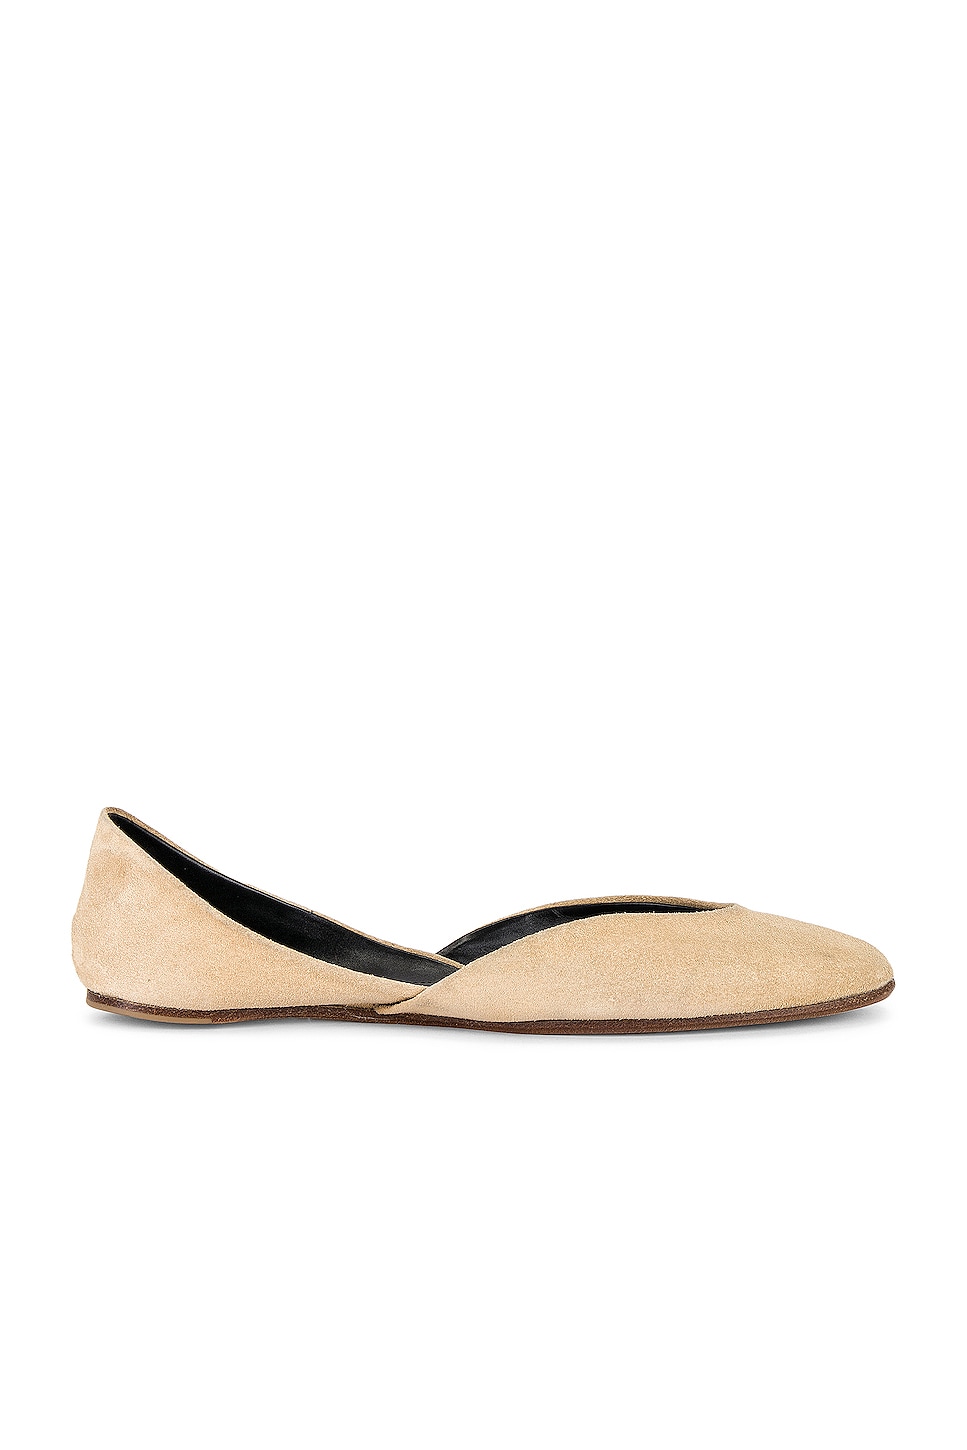 Image 1 of The Row Gemma Ballet Flat in Trench